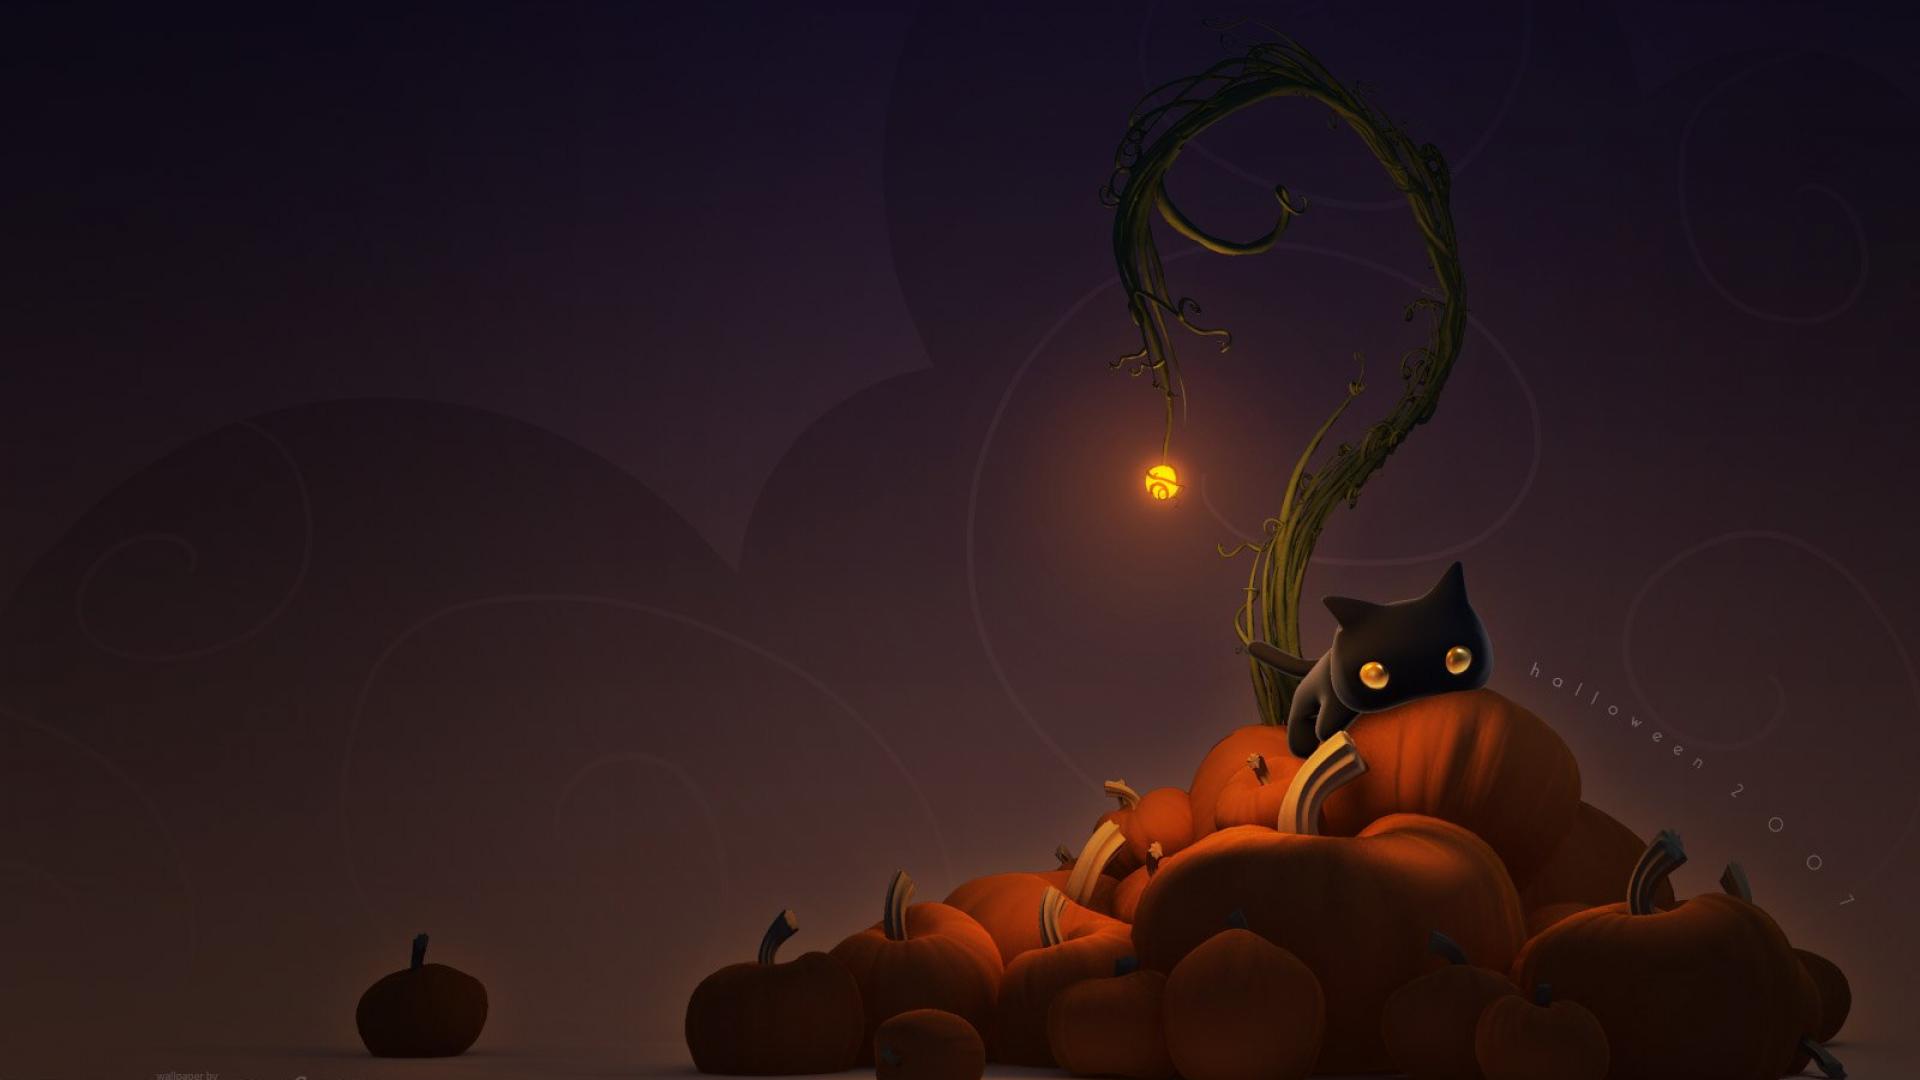 Cat Ready For Halloween Wallpaper Gallery